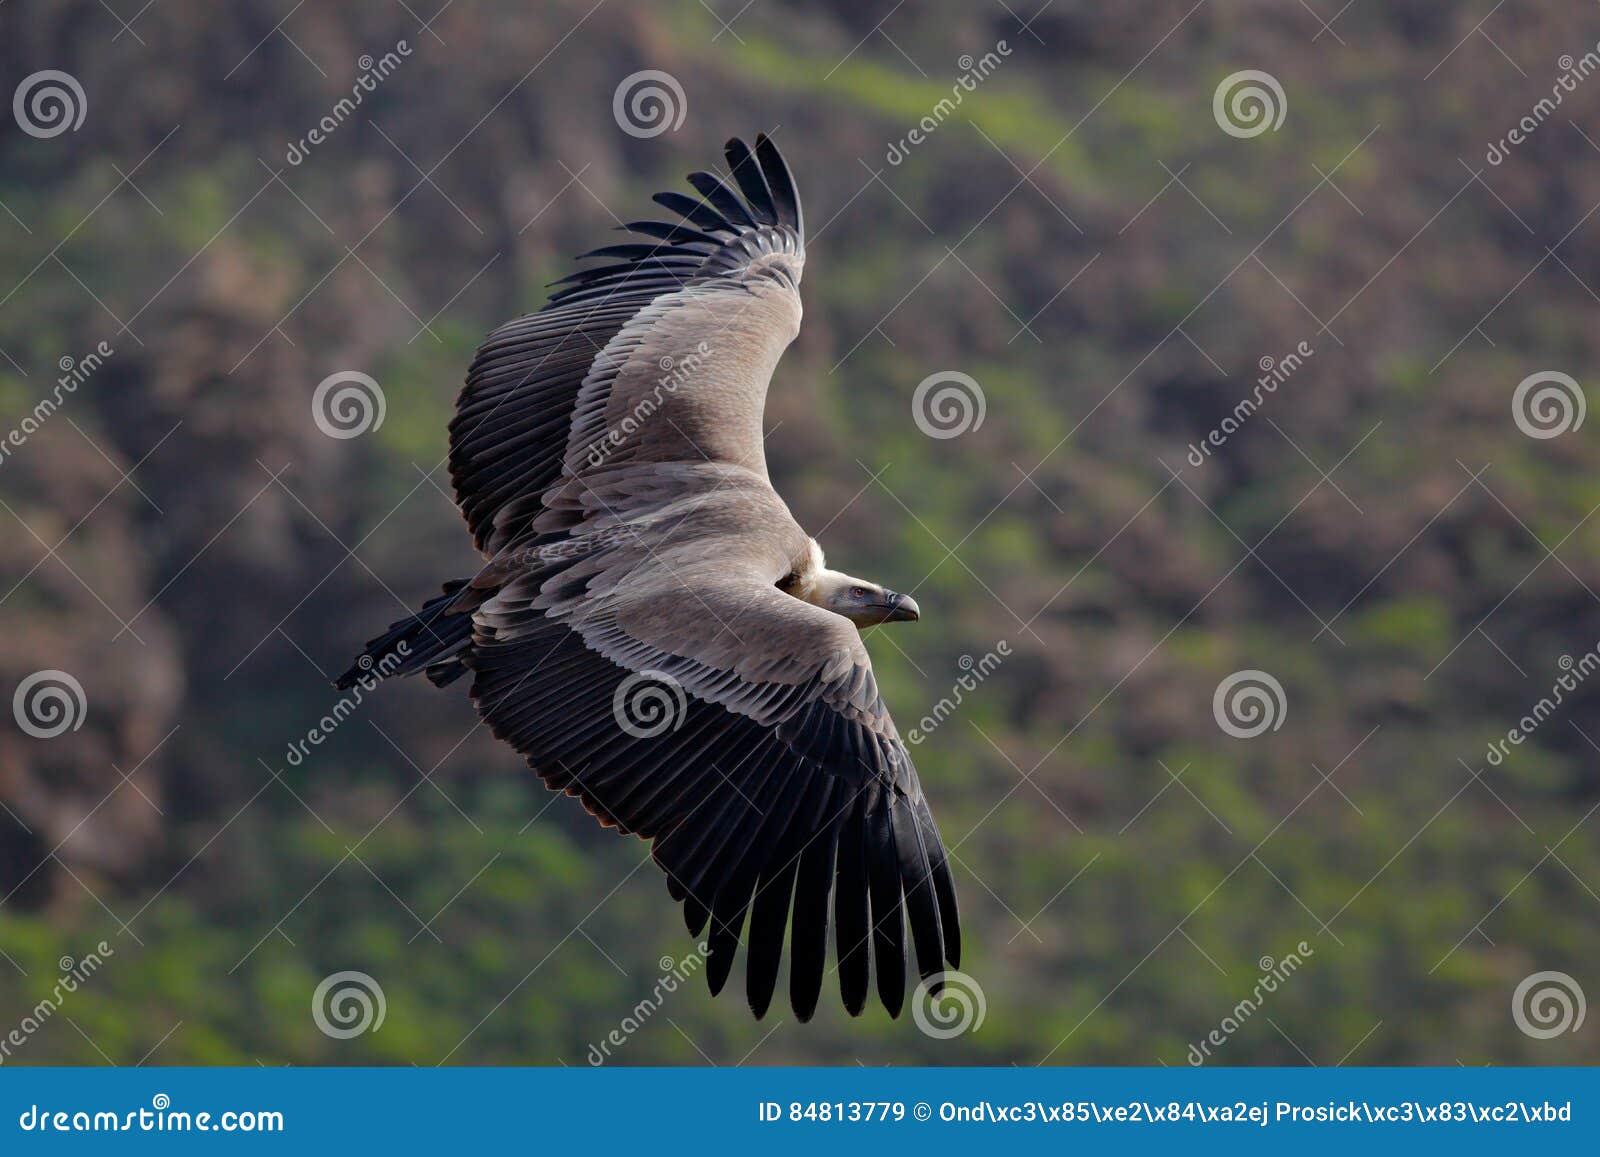 griffon vulture, gyps fulvus, big birds of prey flying above the moountain. vulture in the stone. bird in the nature habitat, spai